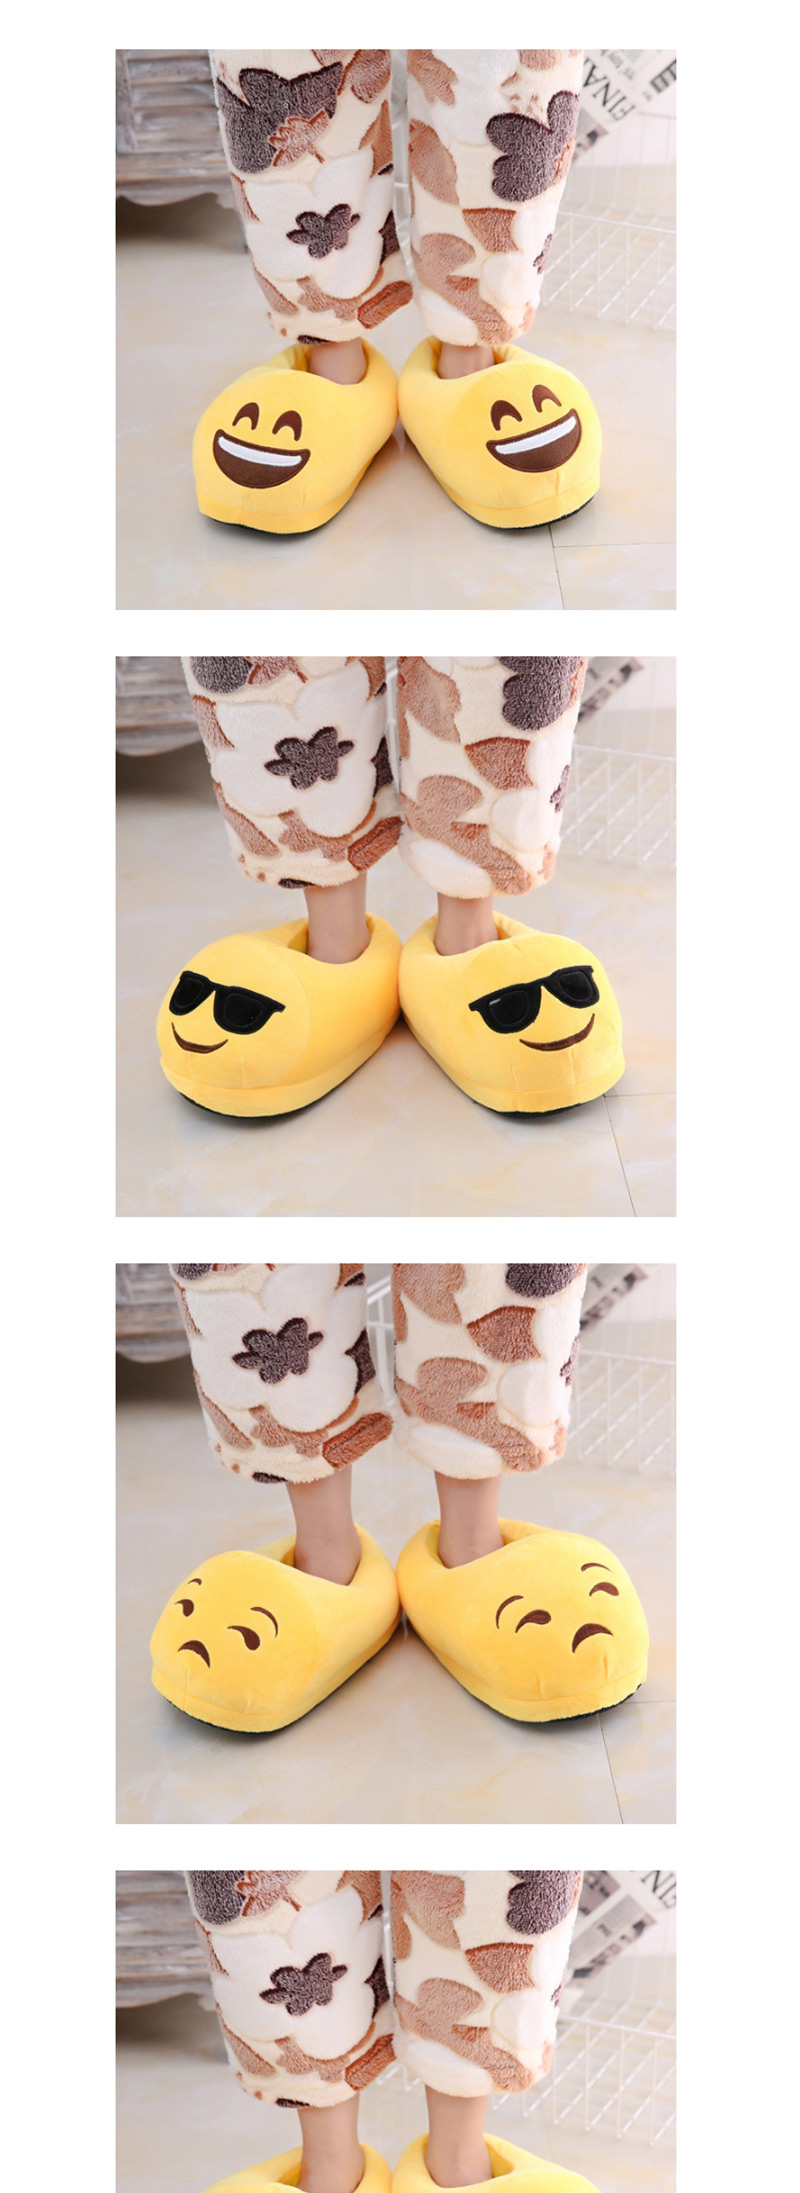 Fashion 9 Yellow Fangs Cartoon Expression Plush Bag With Cotton Slippers,Slippers